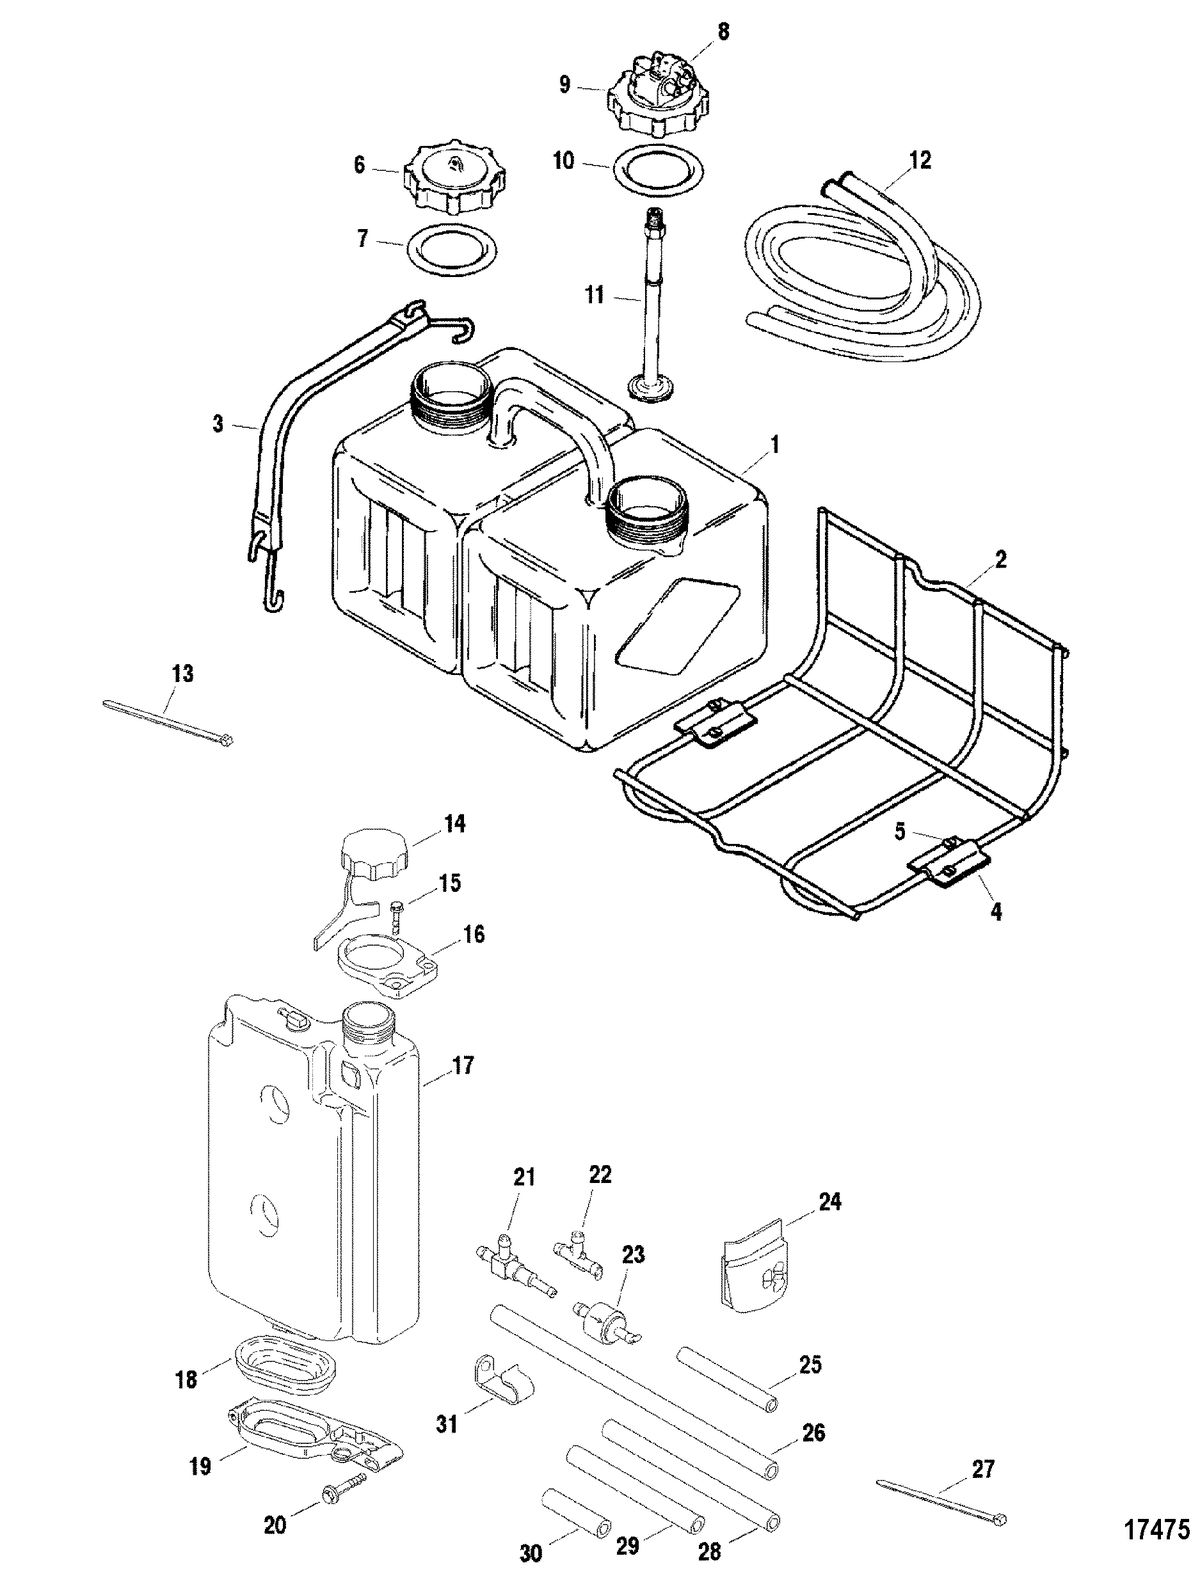 ACCESSORIES FUEL/OIL TANKS, LINES, FILTER KITS AND CORROSION Tank Kit-Remote Oil(1256-8628A10)